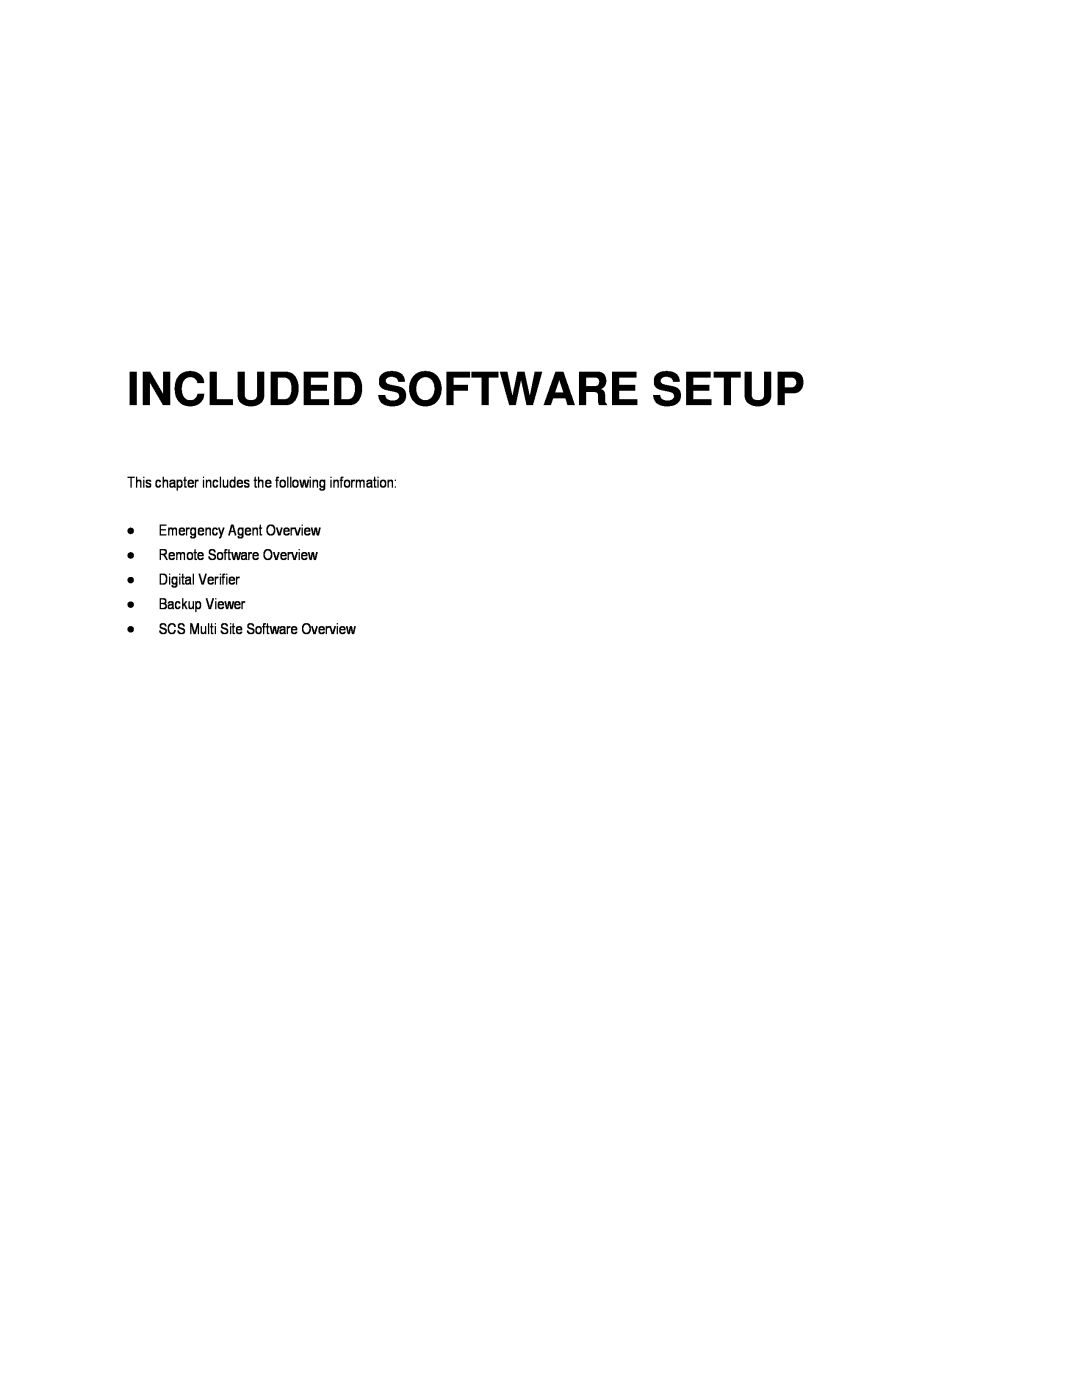 Toshiba EVR32-X, EVR8-X, HVR32-X, HVR8-X, HVR16-X Included Software Setup, This chapter includes the following information 